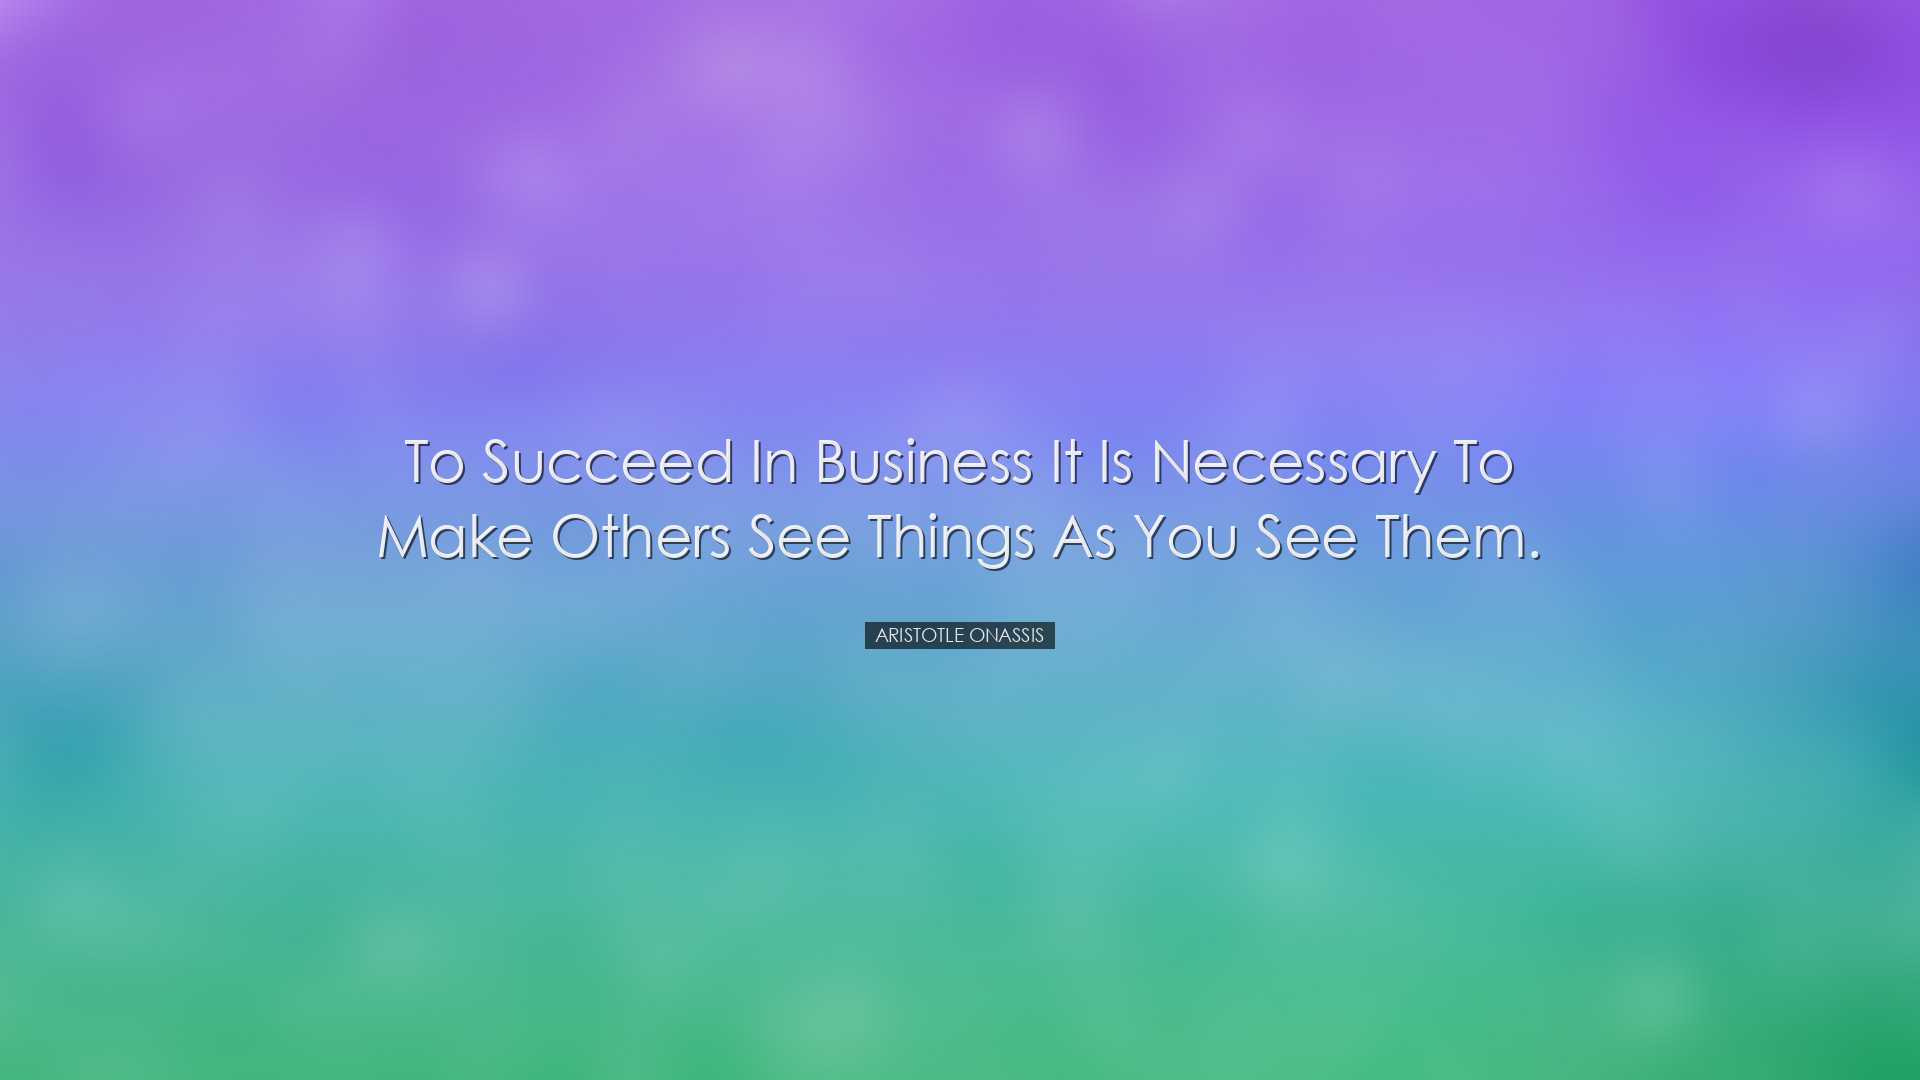 To succeed in business it is necessary to make others see things a